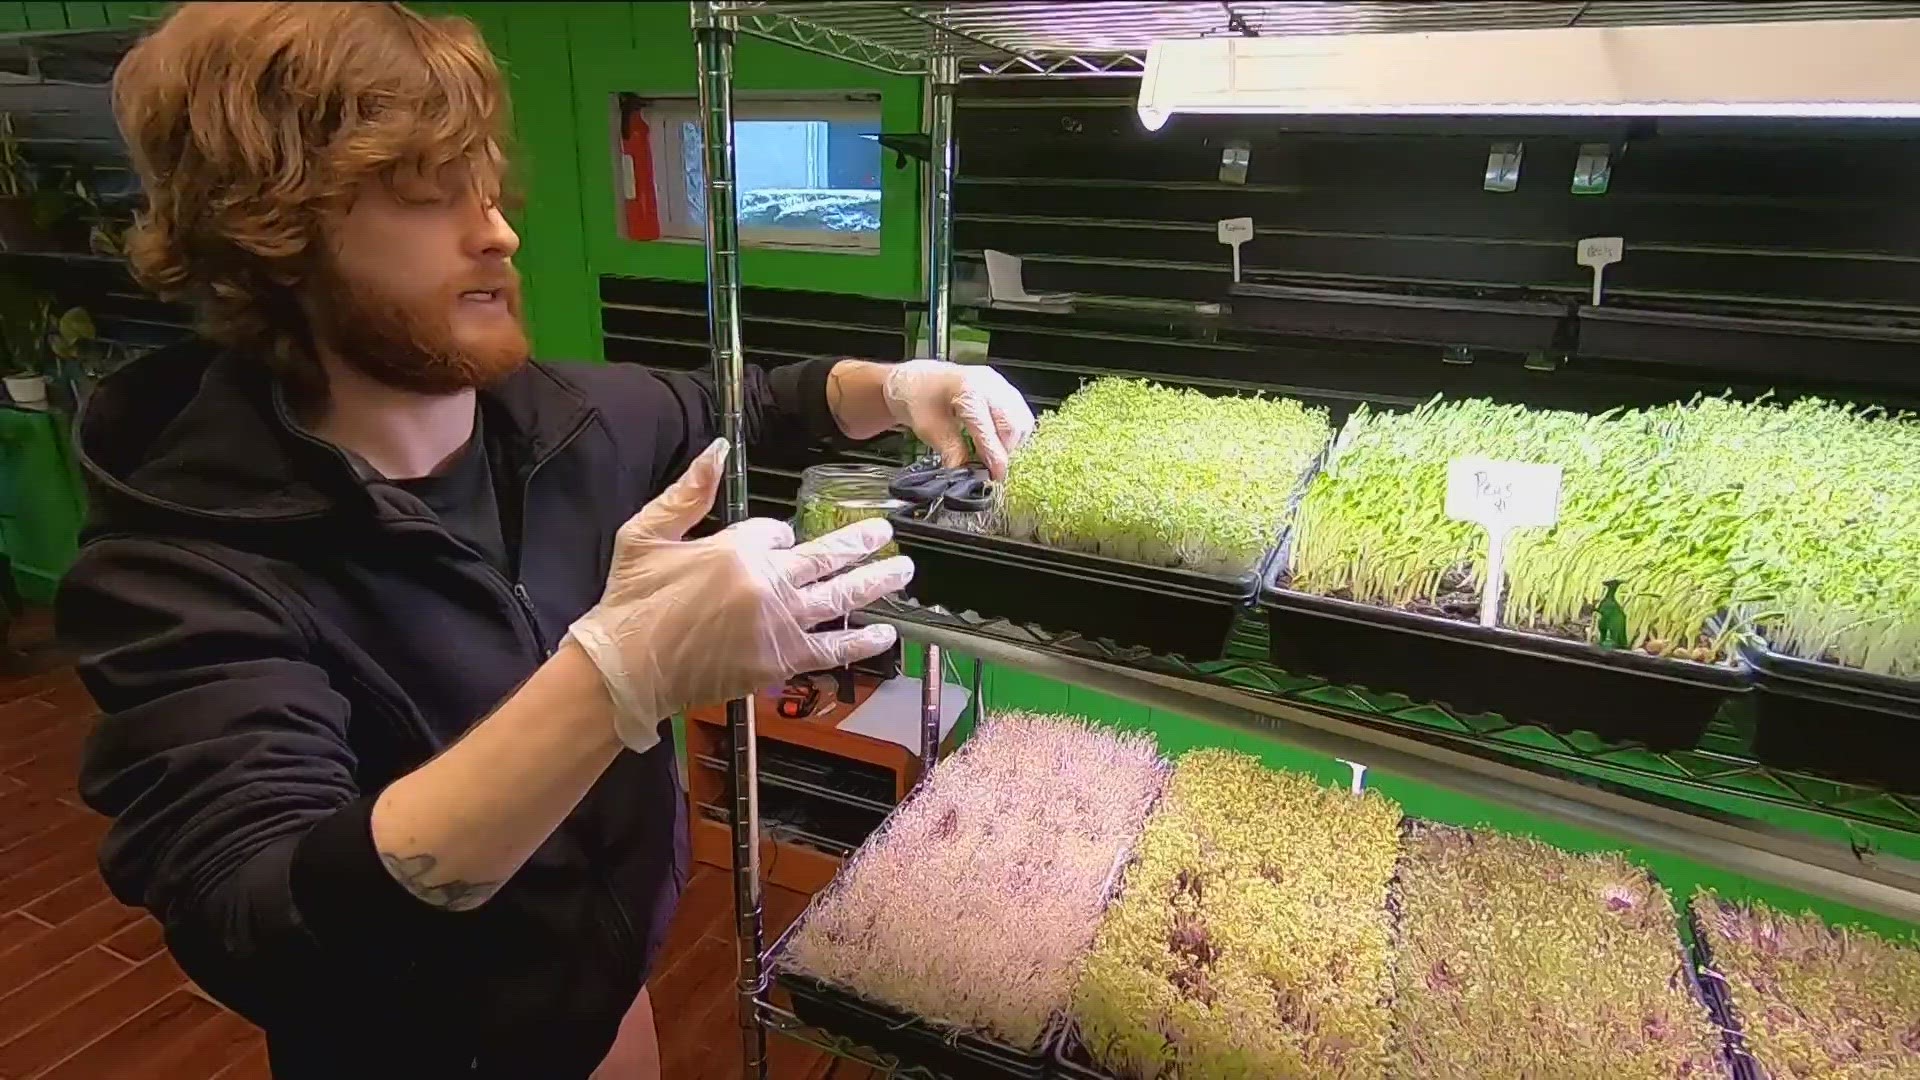 Joey Linder opened The Green Door to help supply and educate the region on the benefits of microgreens.